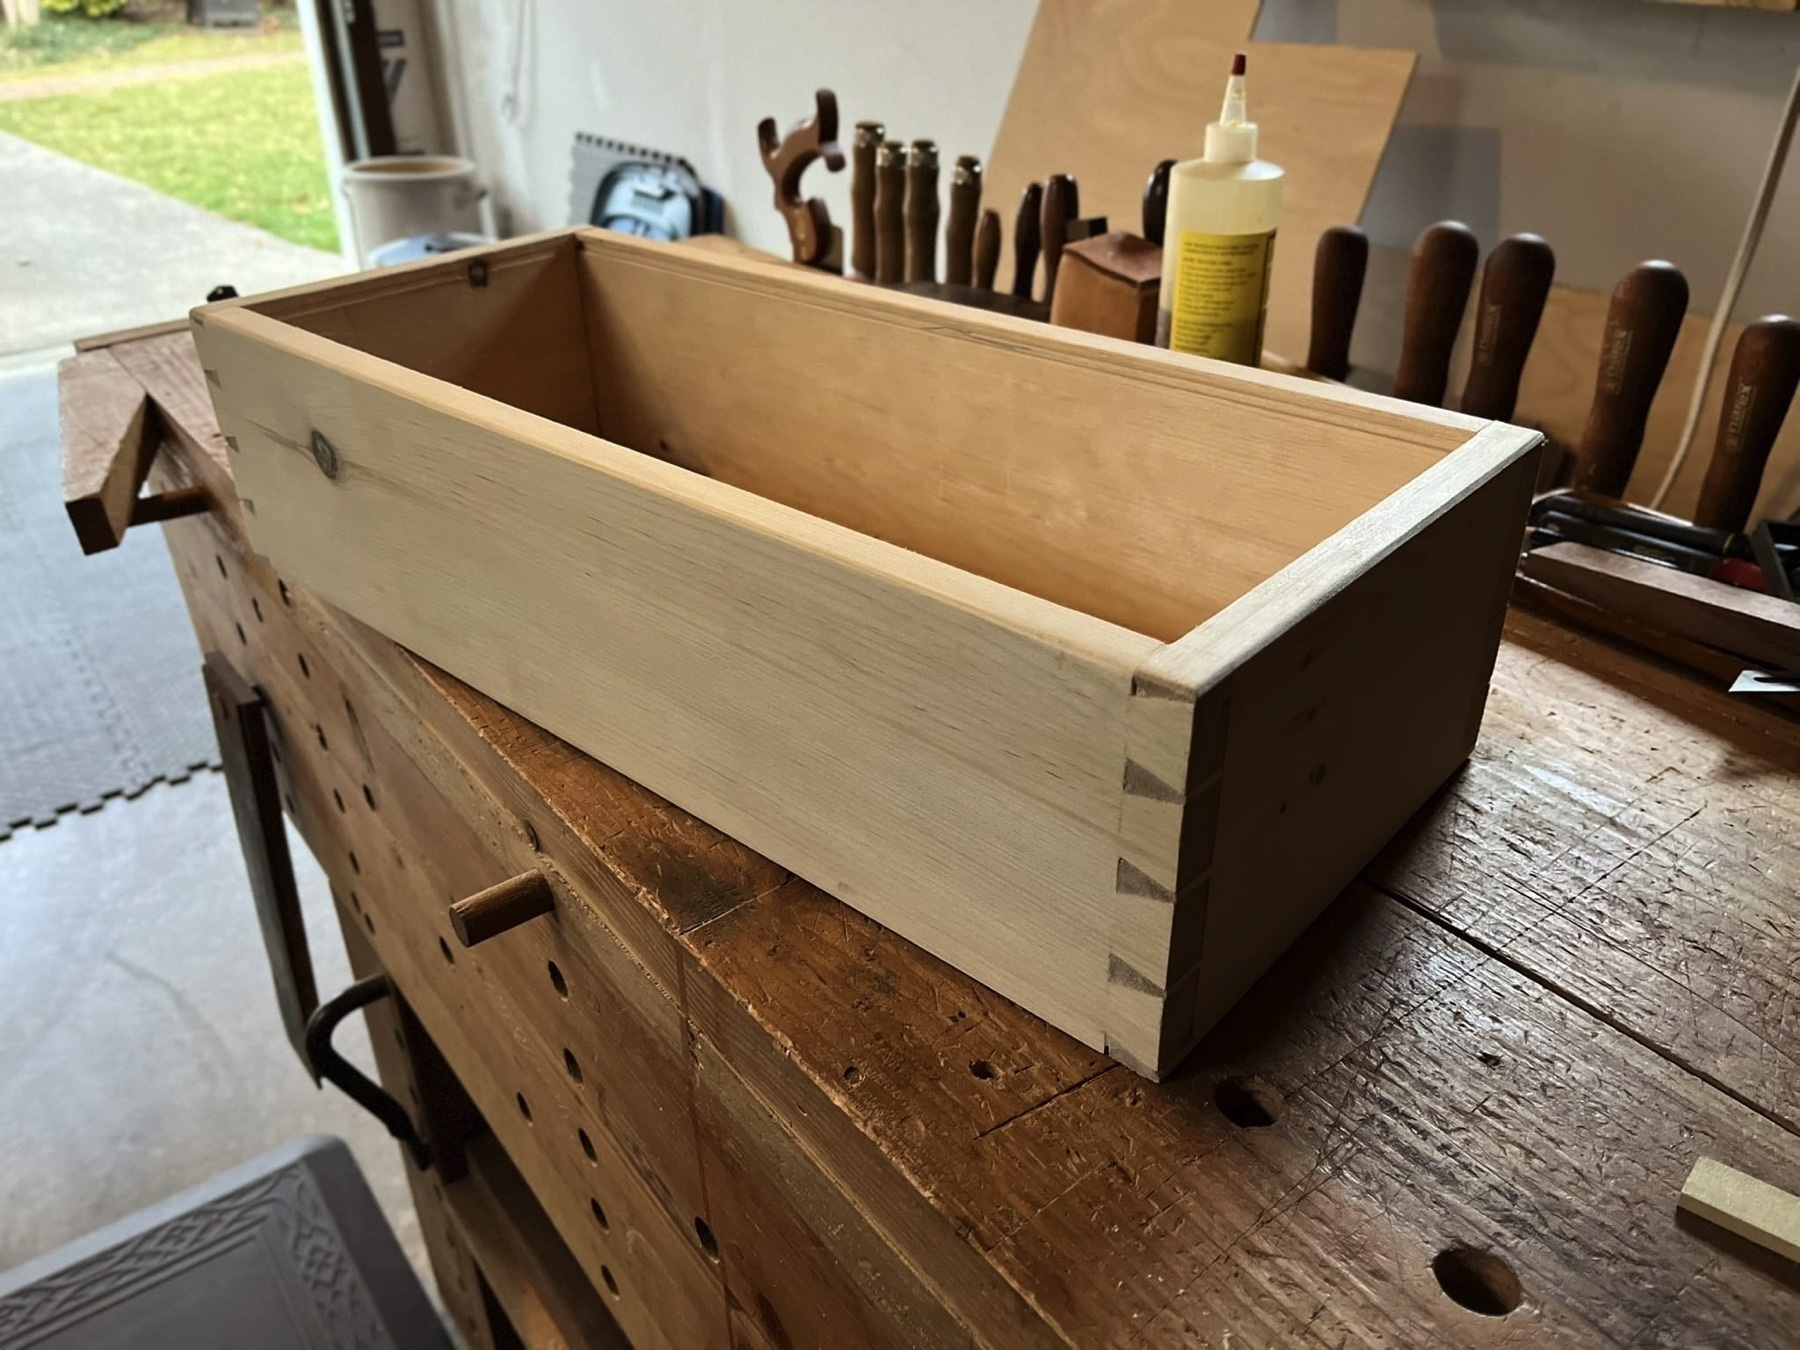 A small pine dovetailed box on a workbench